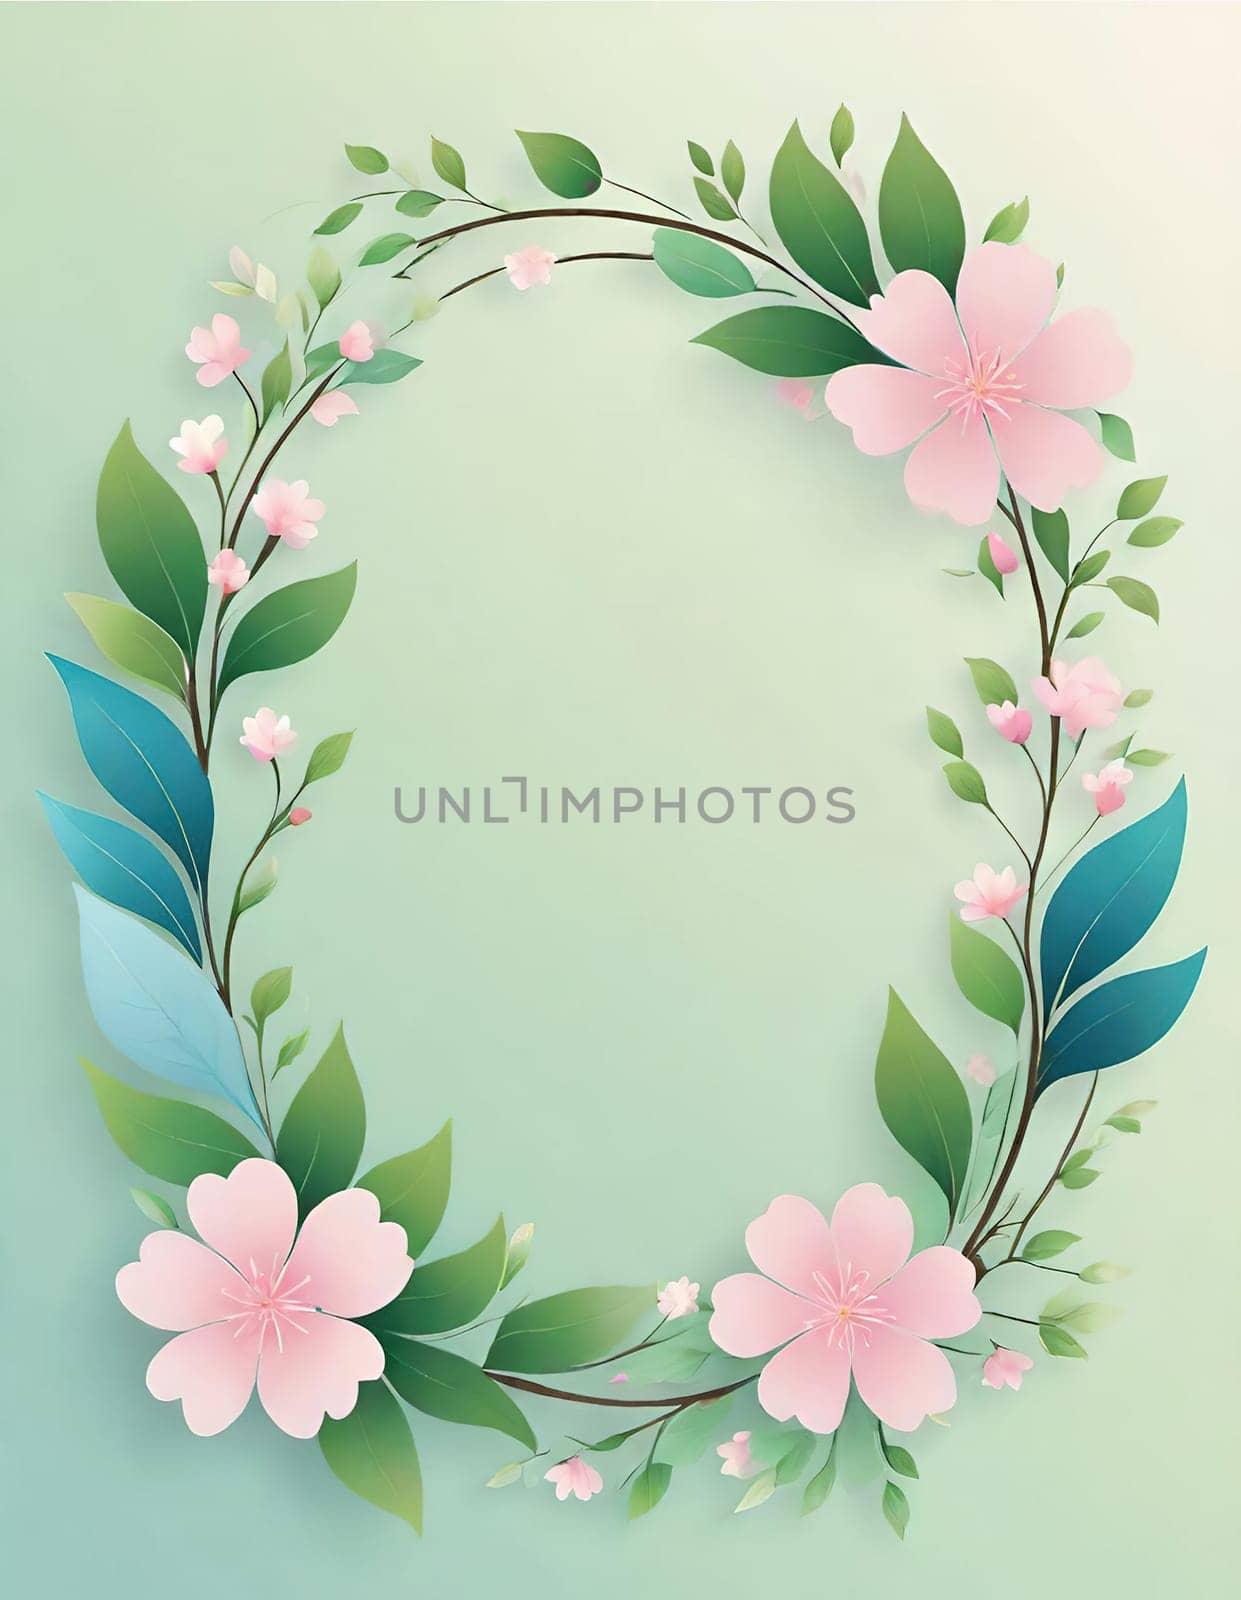 Floral wreath with spring flowers on background. Vector illustration. by yilmazsavaskandag